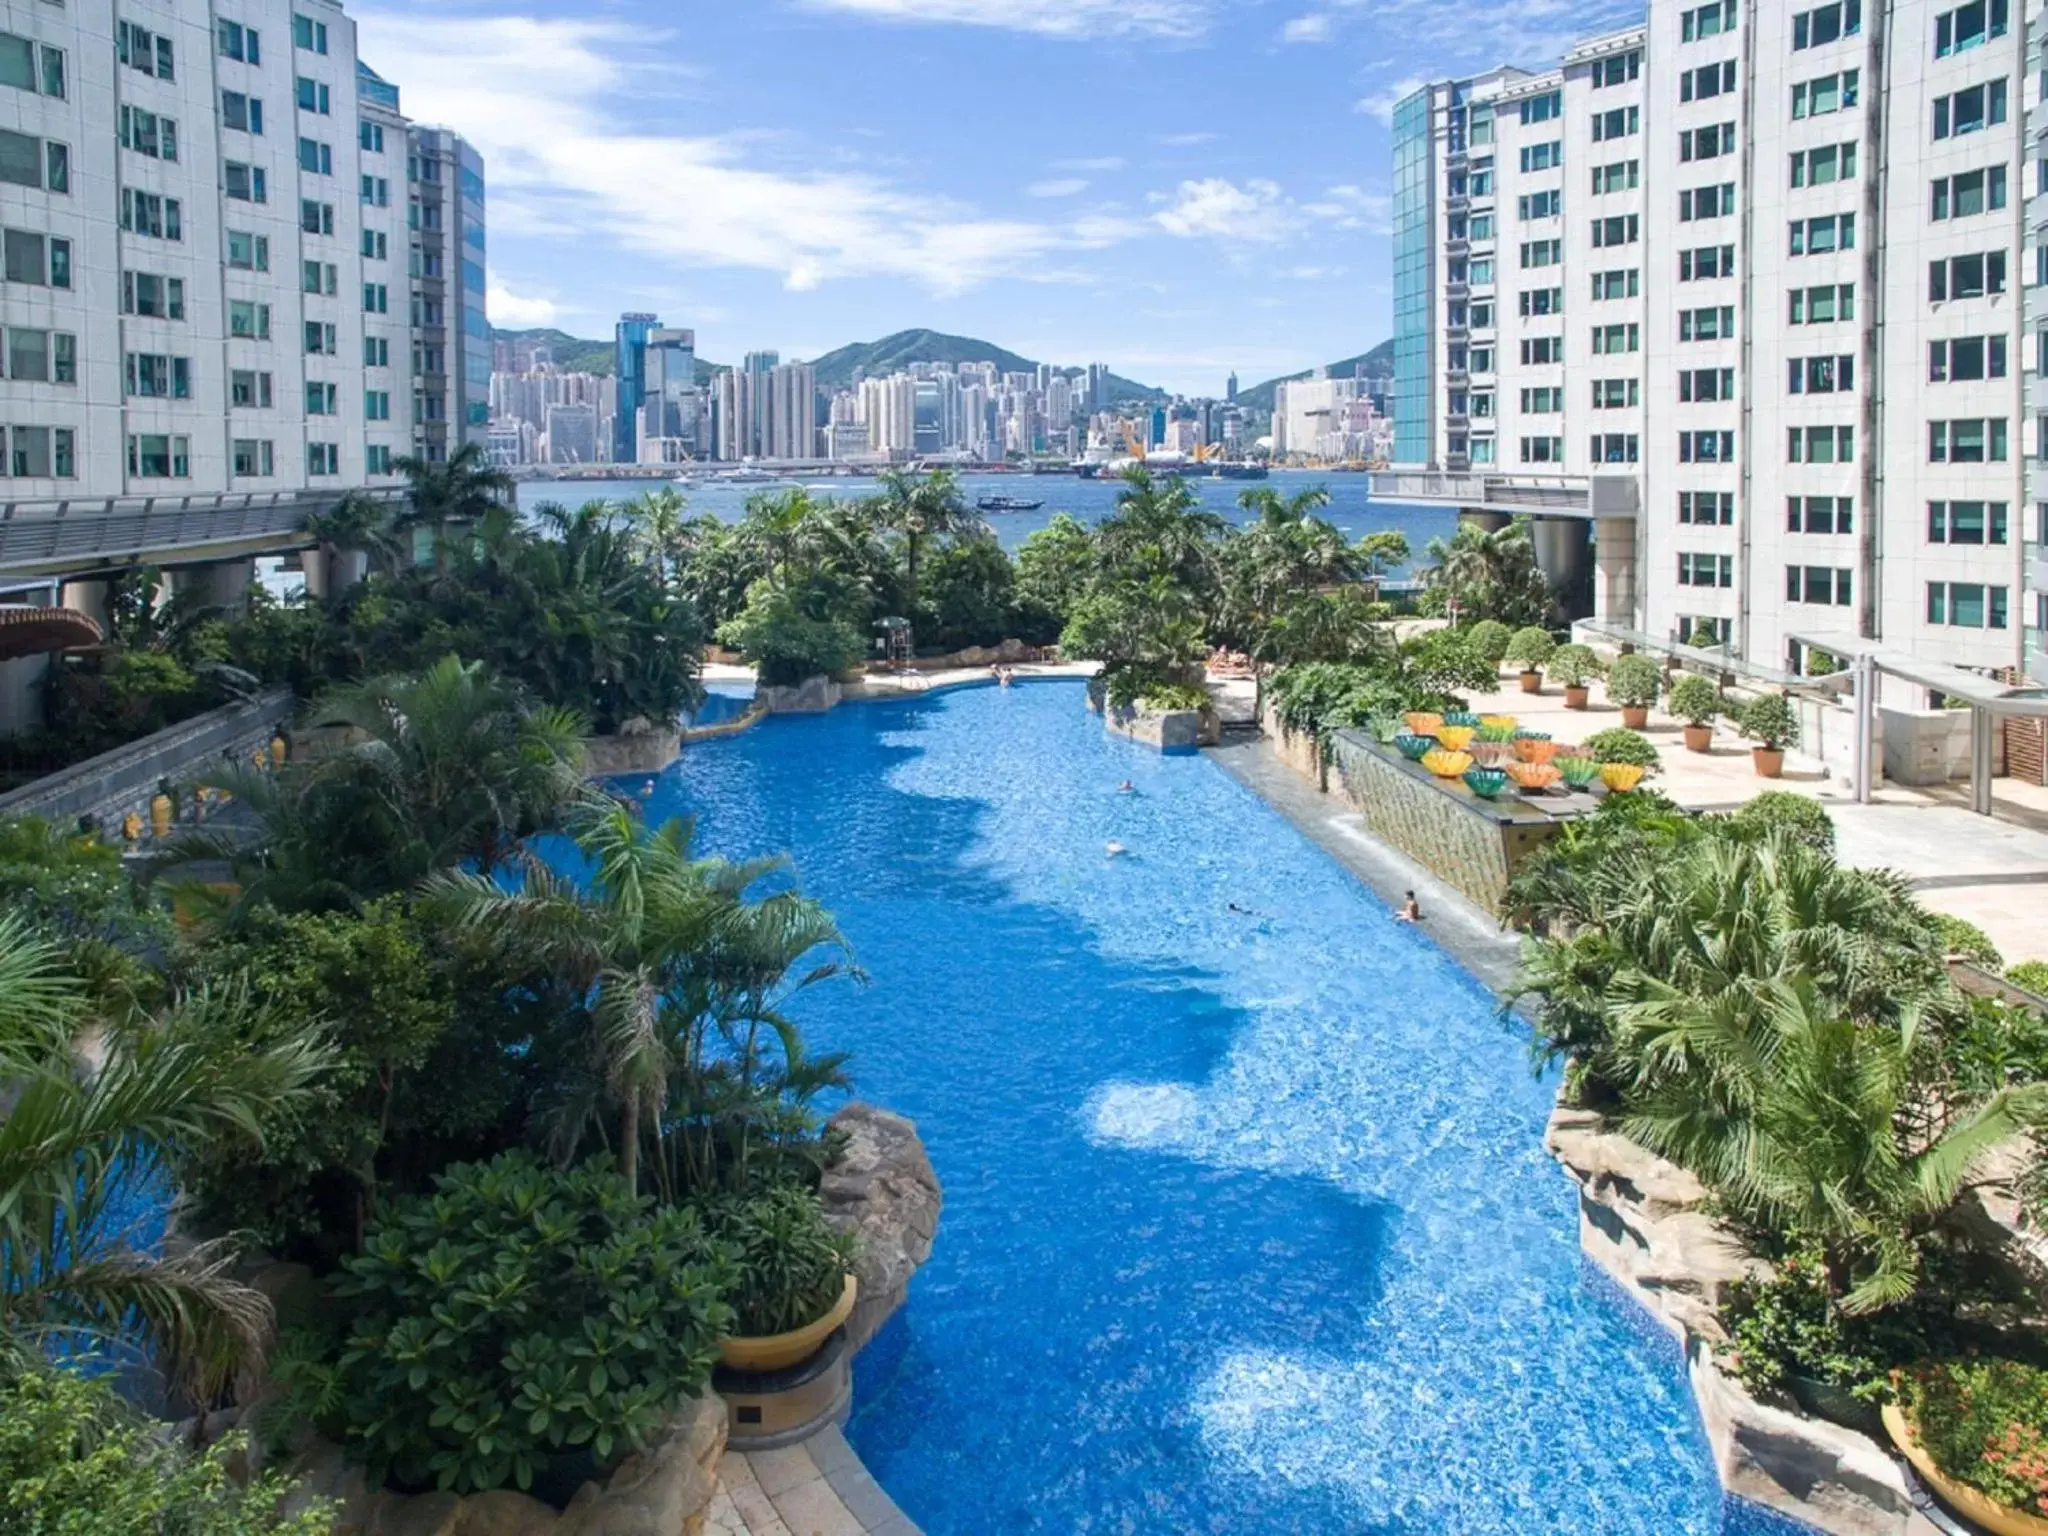 Swimming pool, Pool View in Kowloon Harbourfront Hotel